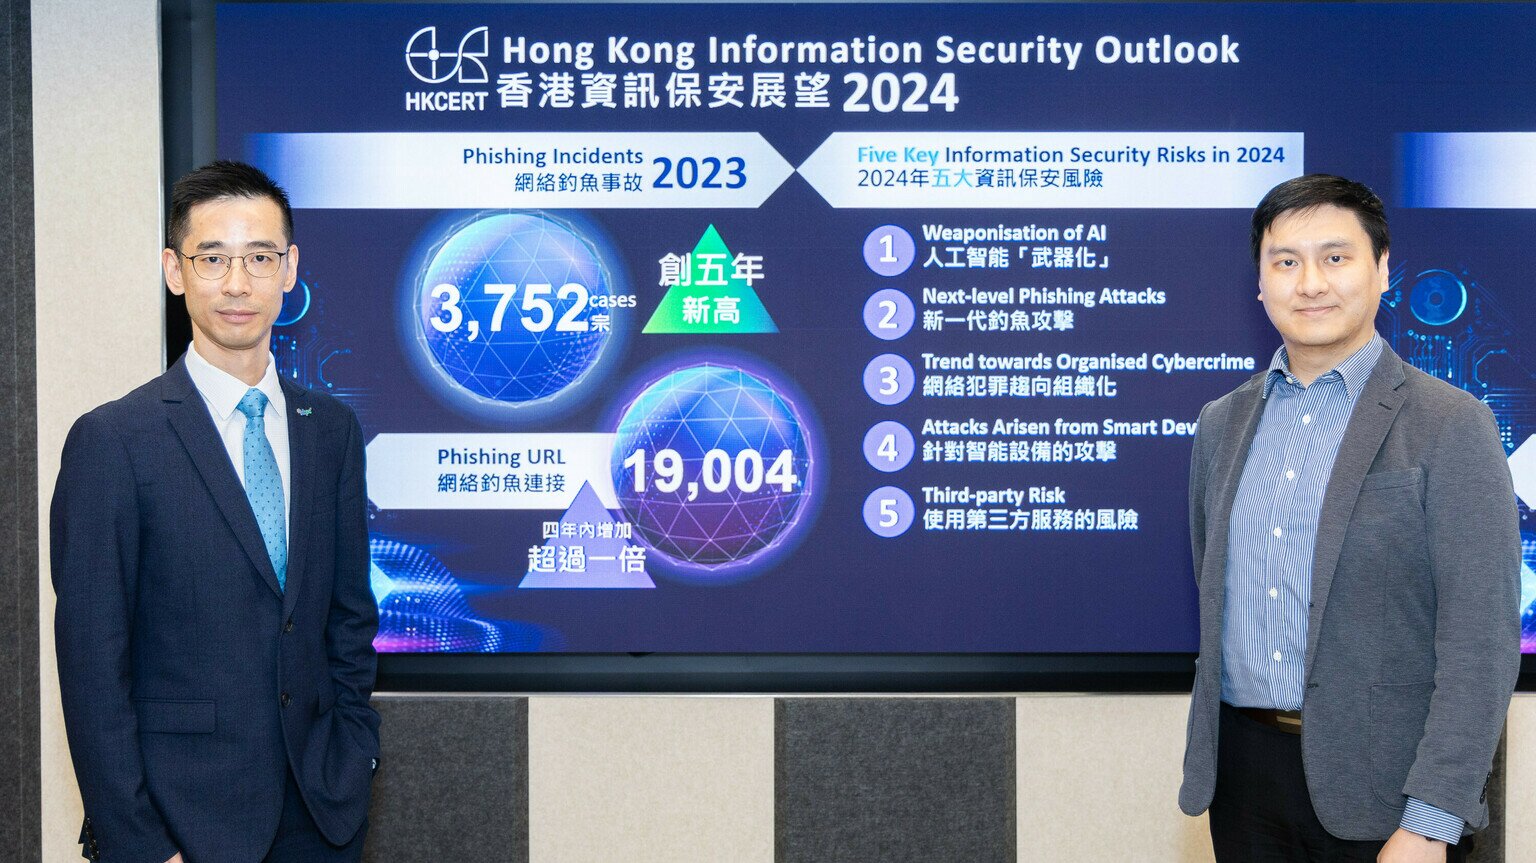 HKCERT Releases Annual Information Security Outlook and Forecast  Next Level Phishing Attacks Difficult to Distinguish  Hackers Exploit AI for Crimes Could Become a New Normal